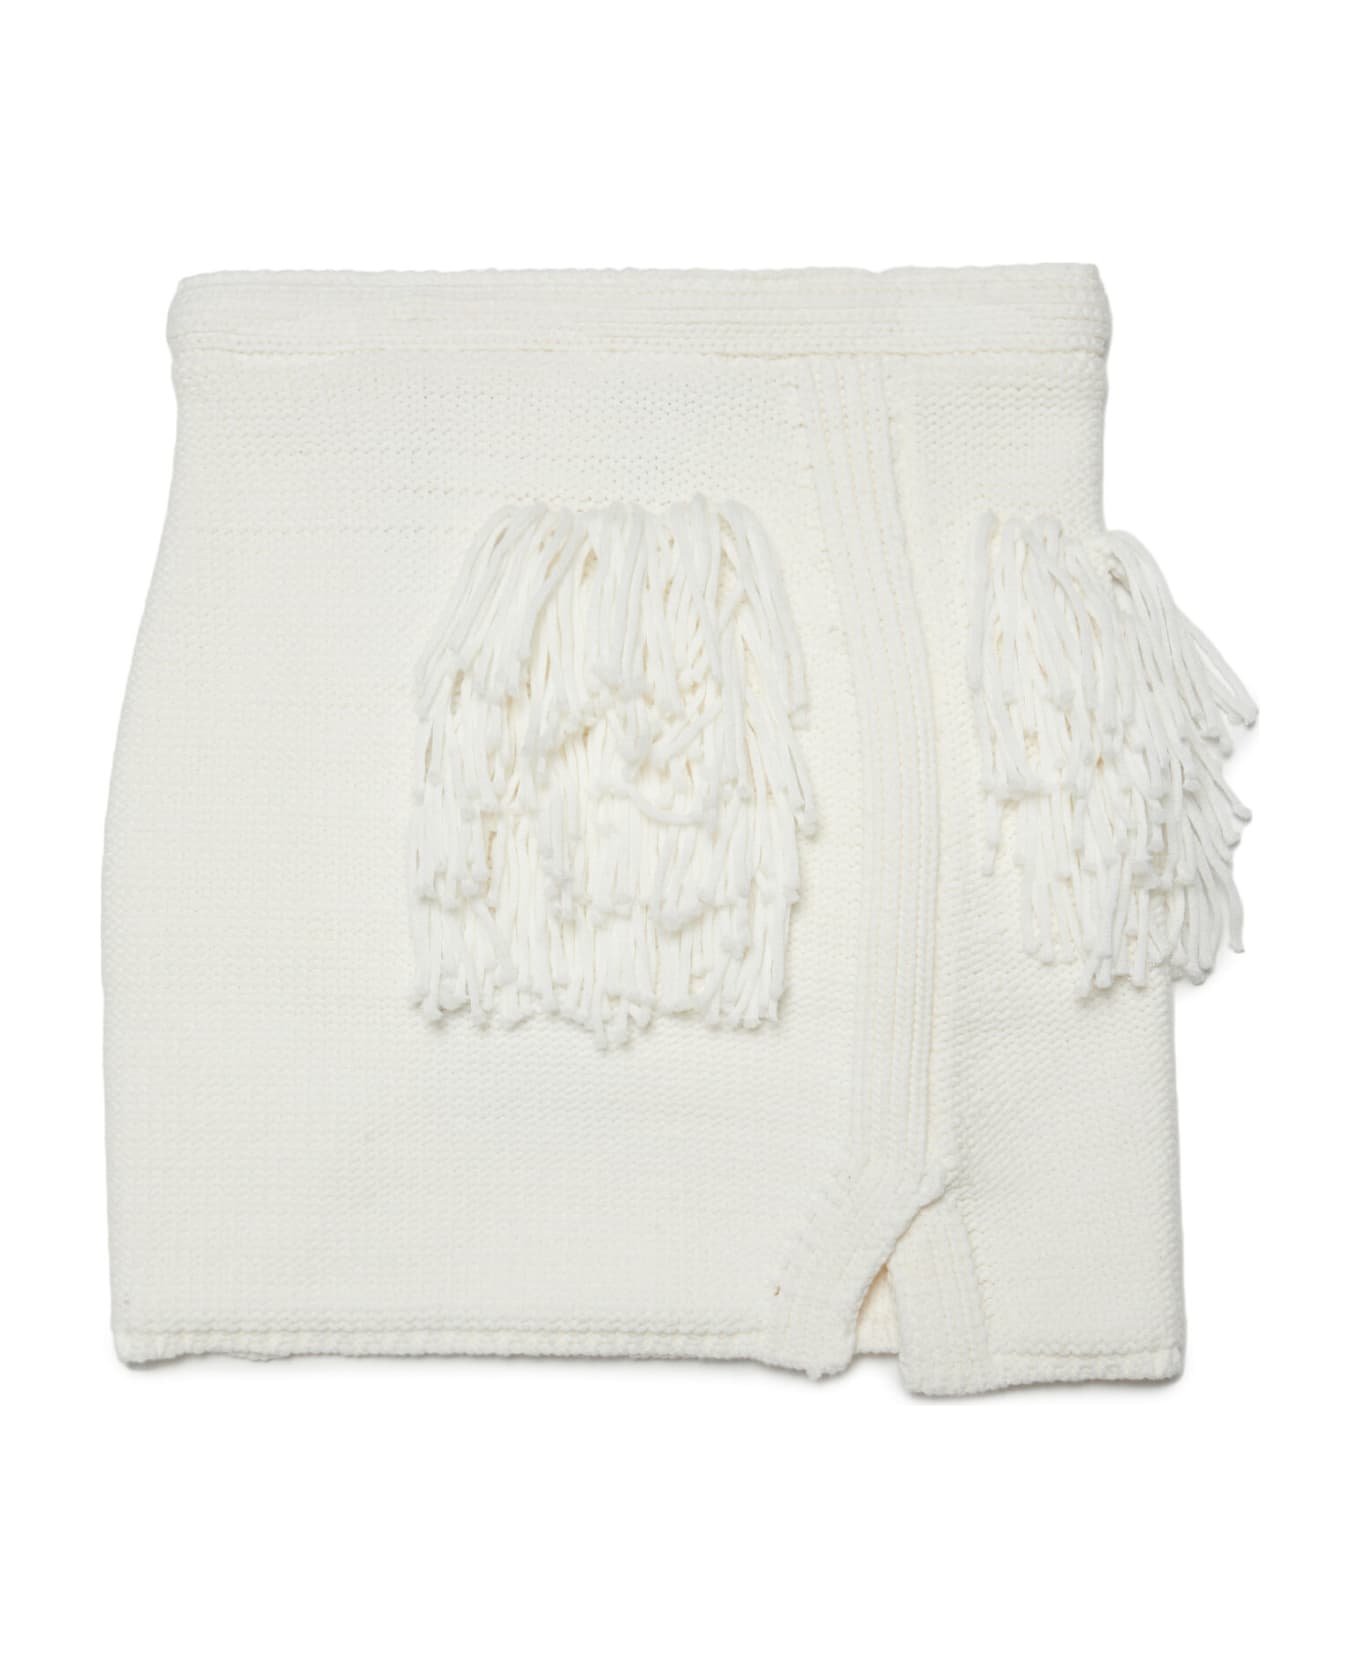 N.21 N21g51f Skirt N°21 White Hand-made Effect Knit Skirt With Applied Fringes - Natural white